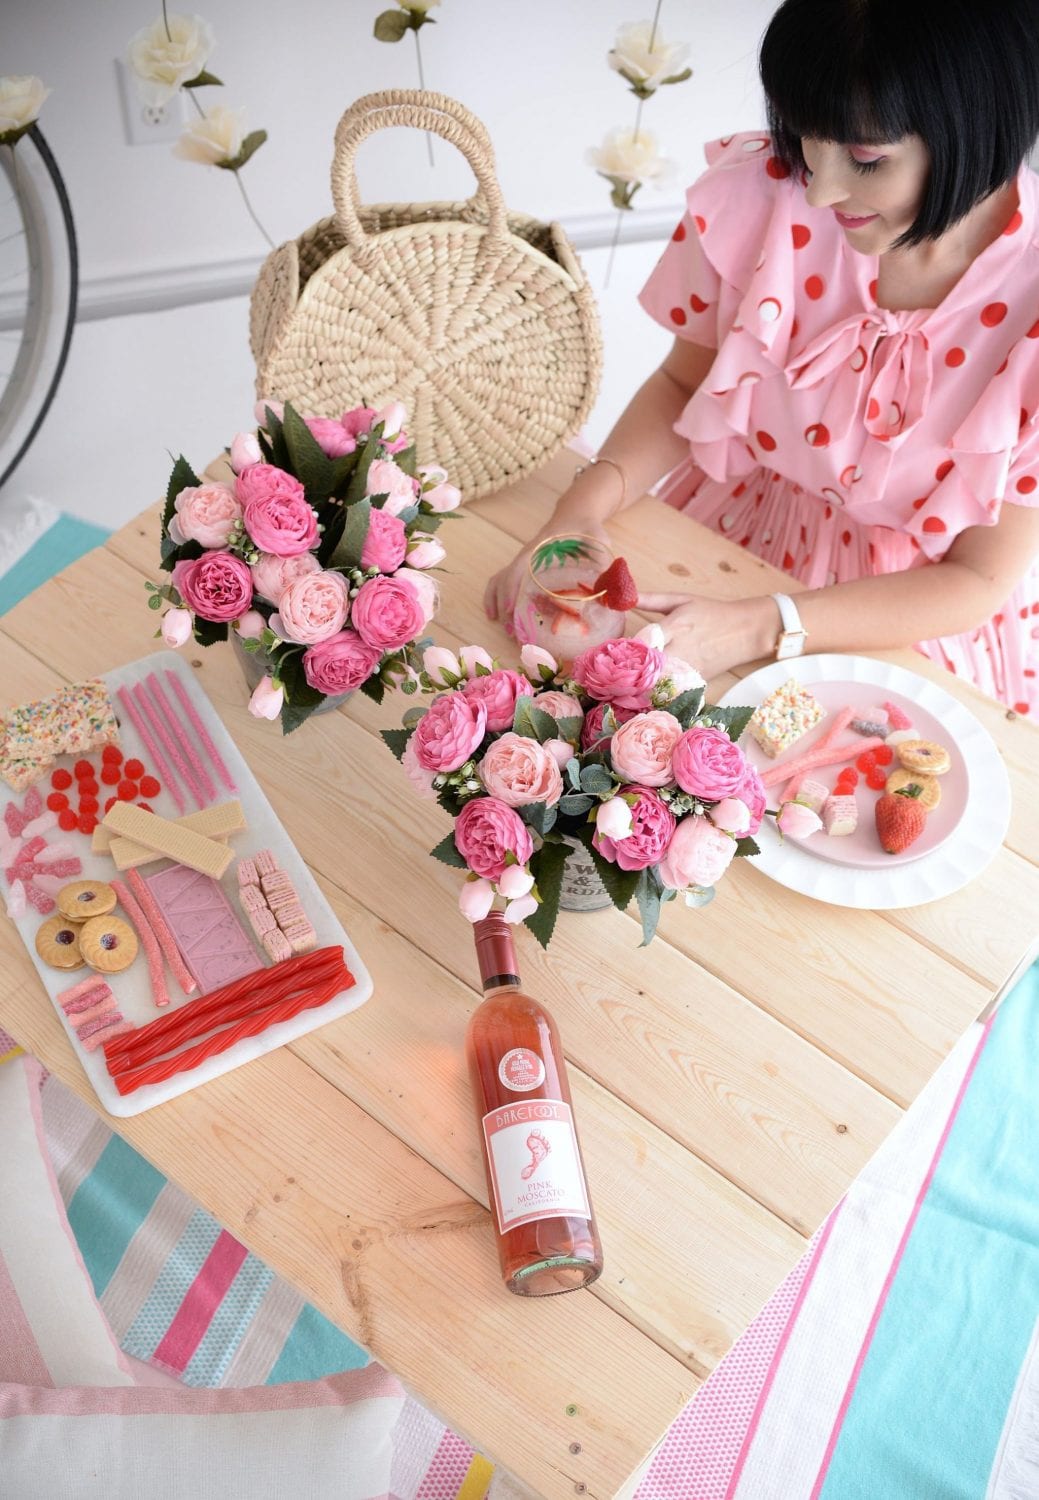 Steps to Creating the Perfect Indoor Picnic